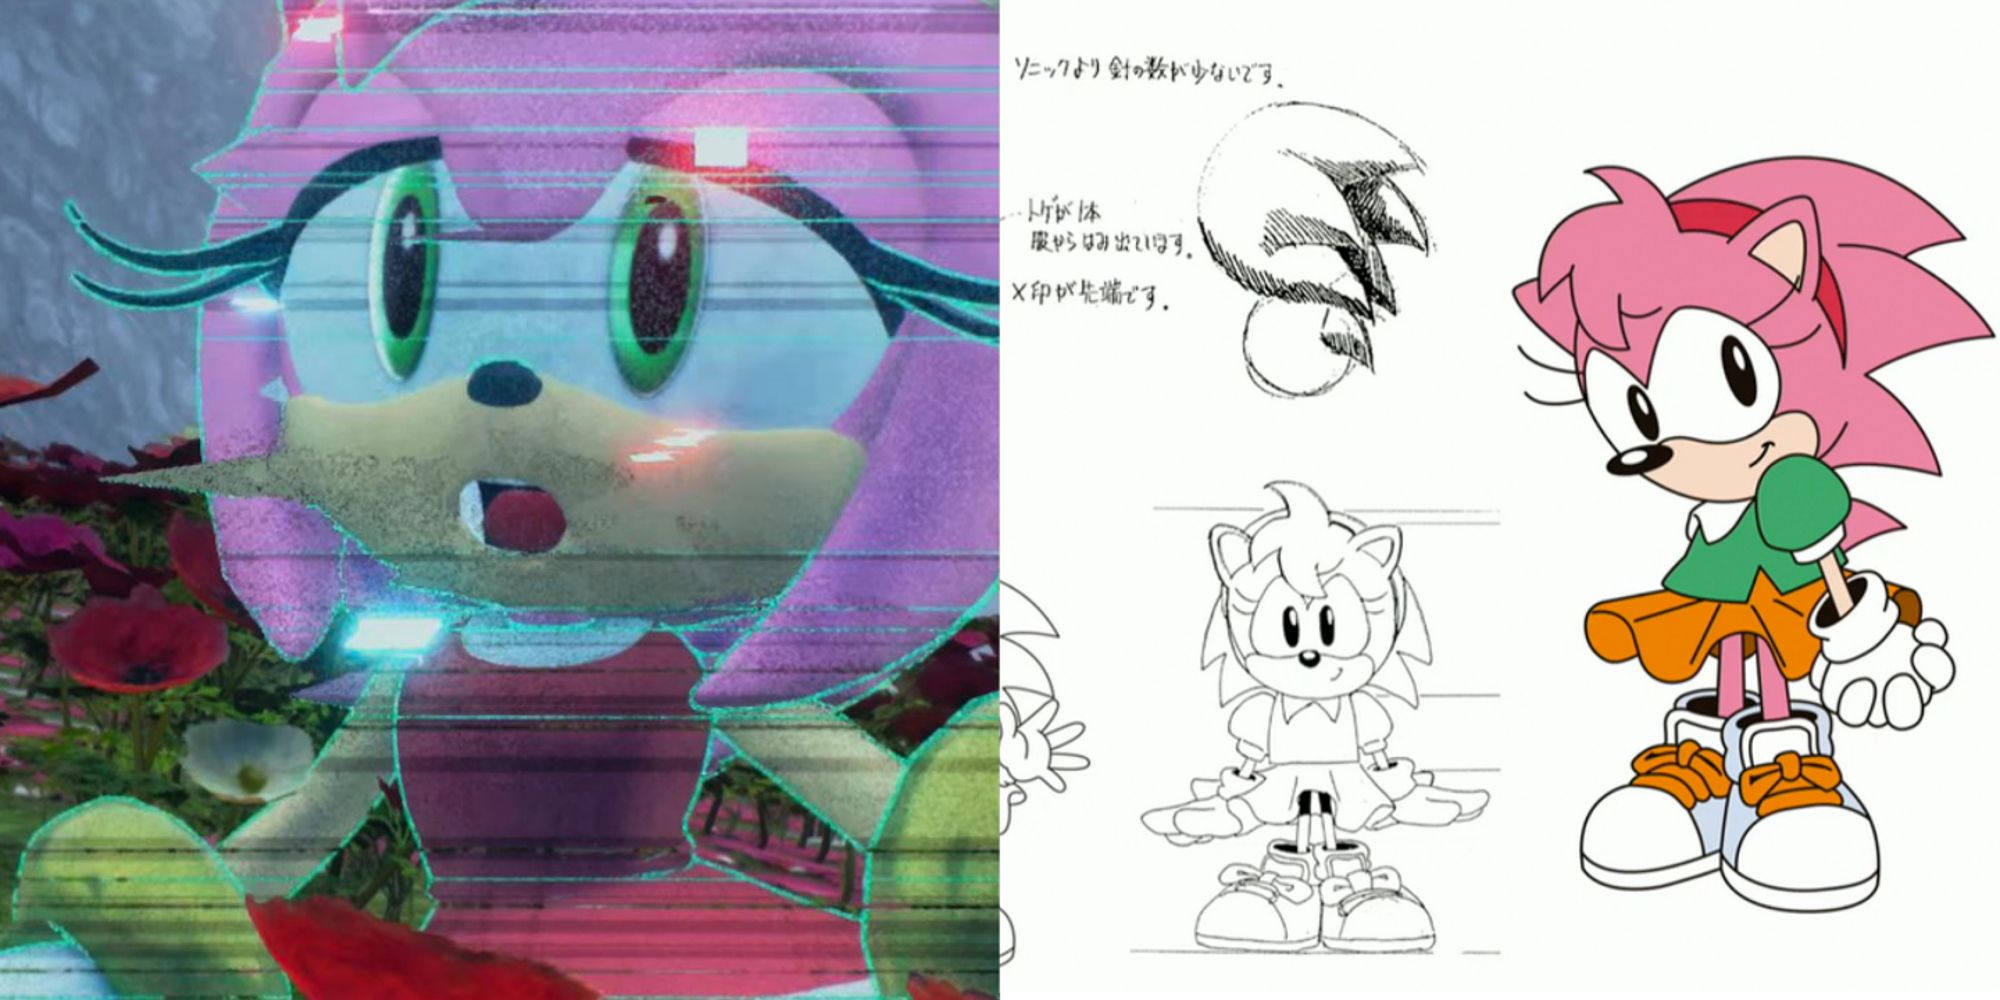 Amy Rose's modern design as she appears in Sonic Frontiers, positioned next to her original design in Sonic CD with a green and orange dress and matching sneakers..